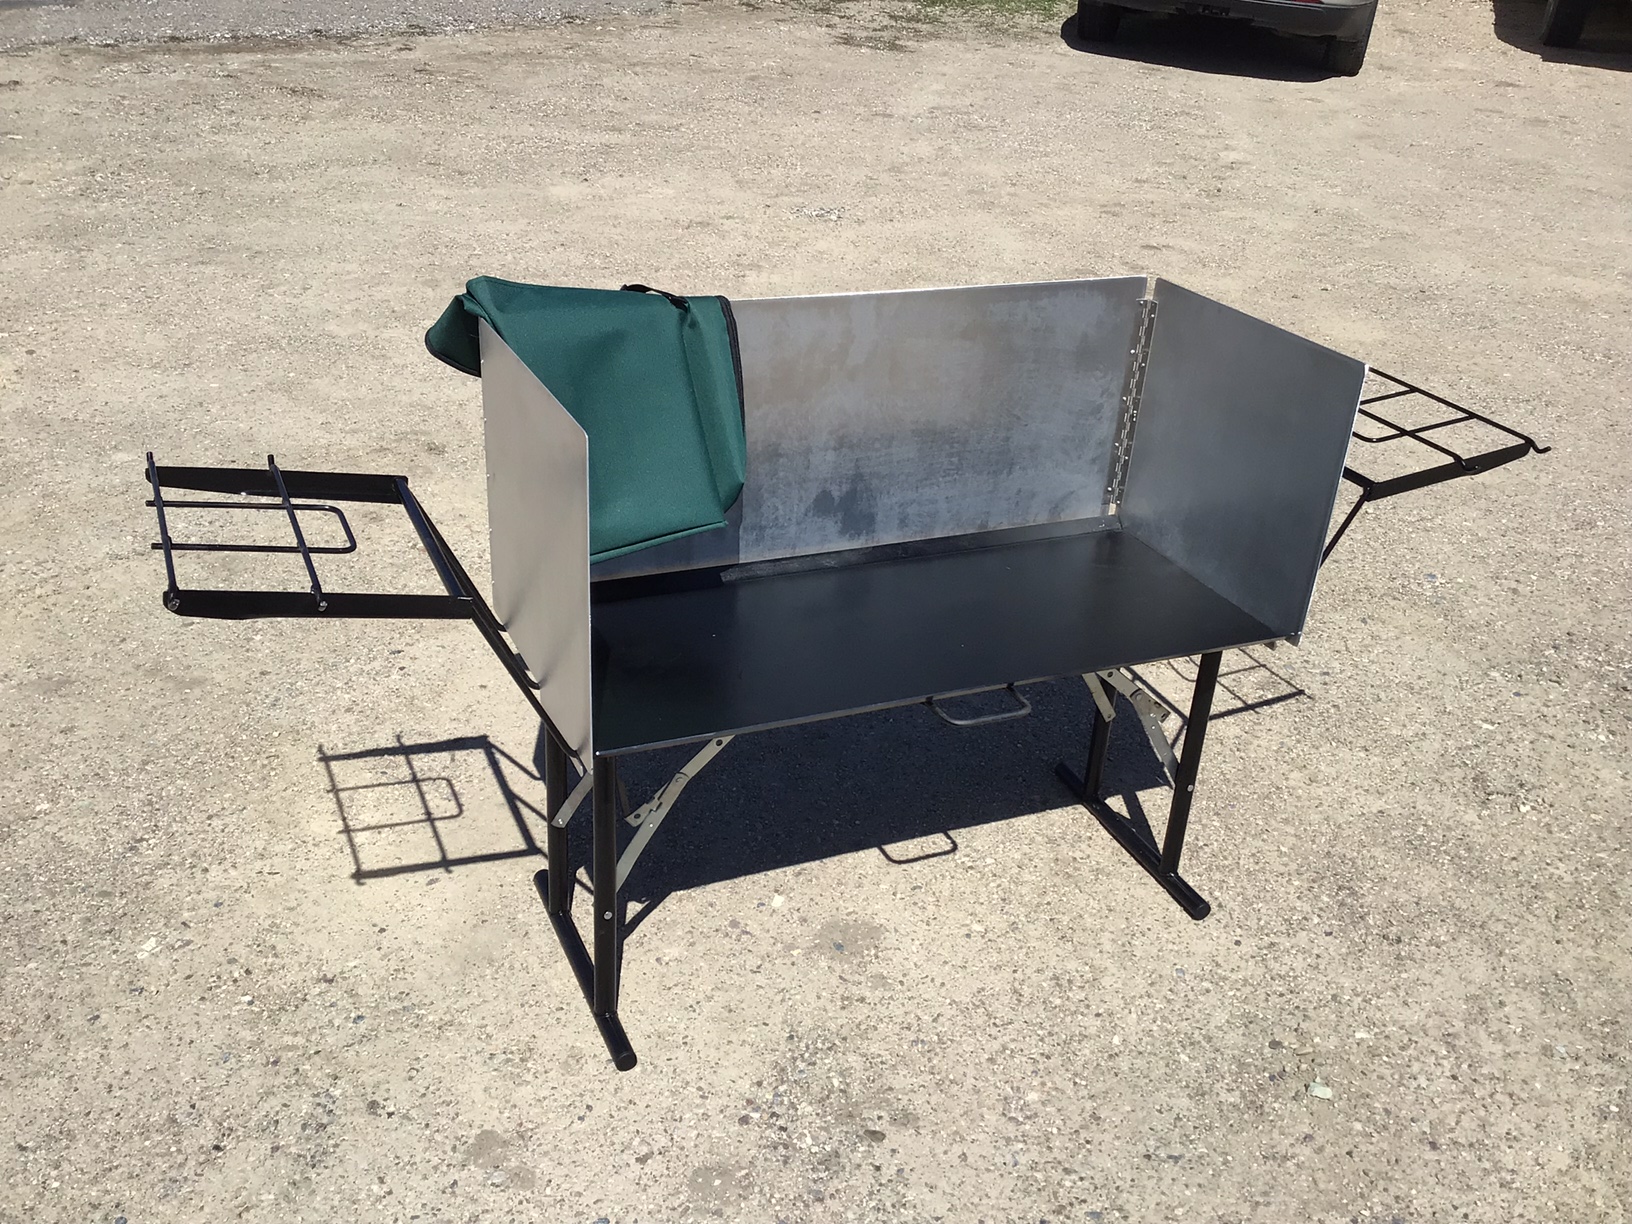 Chuckwagon Supply - Everything for Dutch oven and Camp Cooking